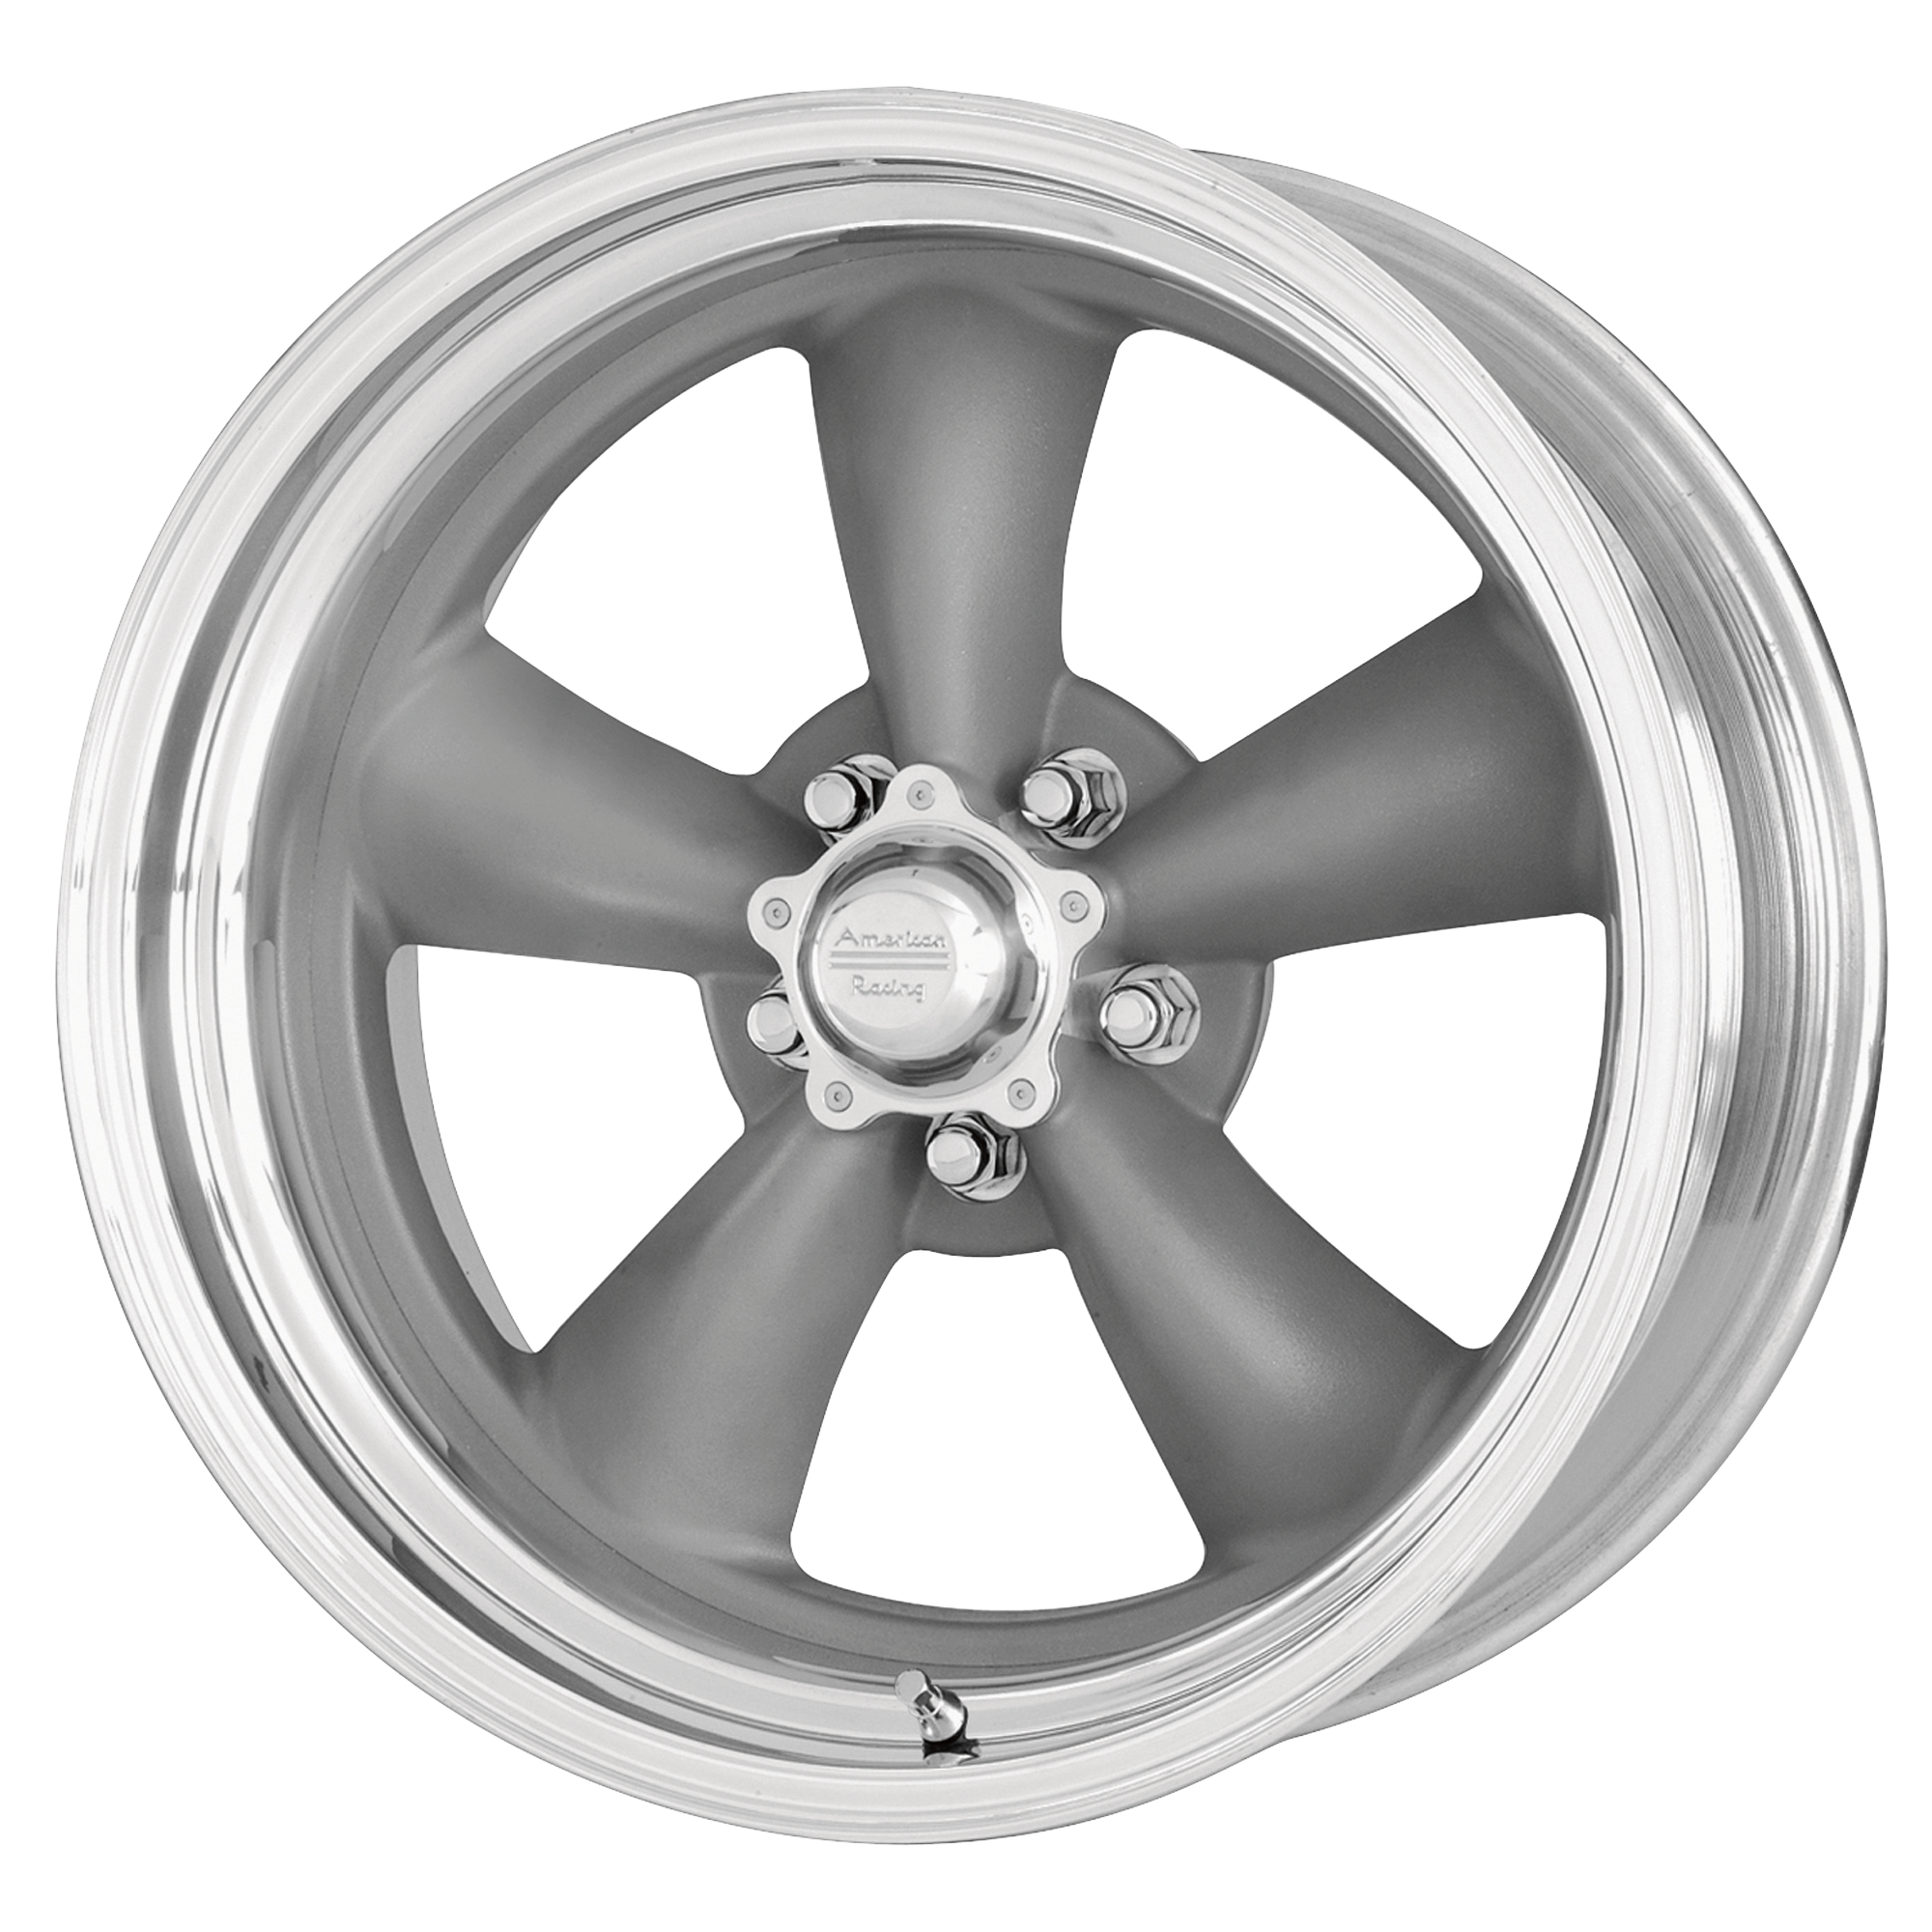 CLASSIC TORQ THRUST II ONE PIECE 15x10 5x114.30 MAG GRAY W/ MACHINED LIP (-44 mm) - Tires and Engine Performance